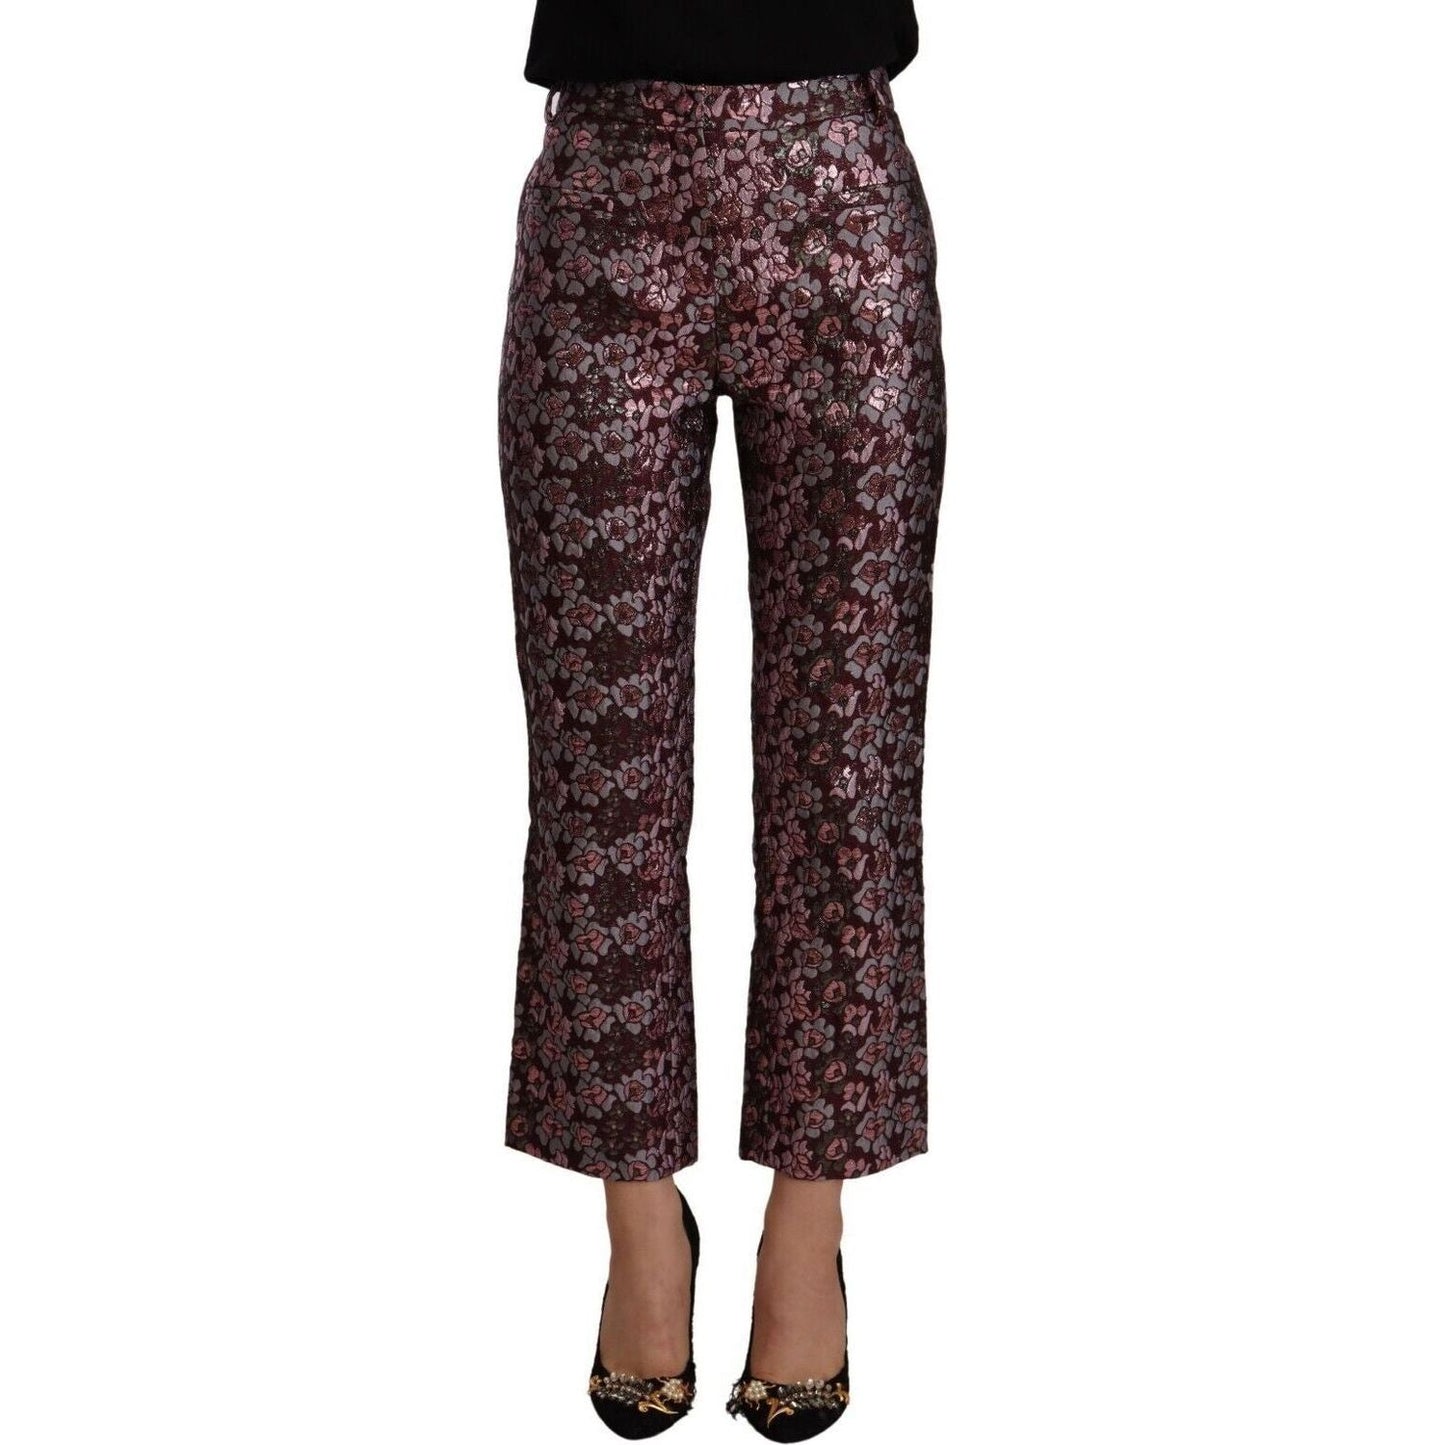 House of Holland High Waist Jacquard Flared Cropped Trousers multicolor-floral-jacquard-flared-cropped-pants s-l1600-149-a515a5d6-22e.jpg